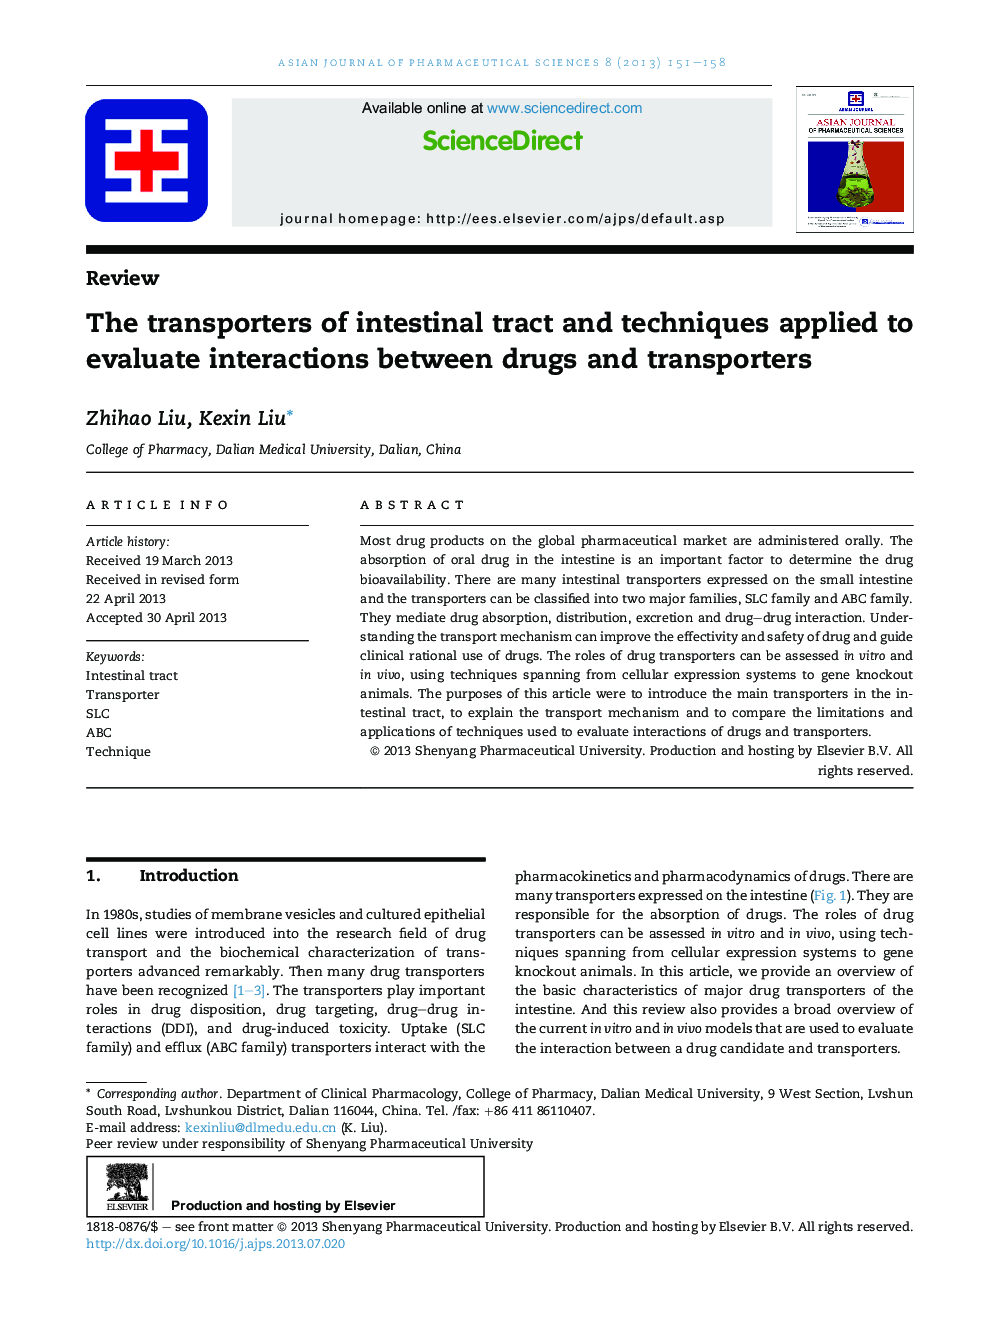 The transporters of intestinal tract and techniques applied to evaluate interactions between drugs and transporters 